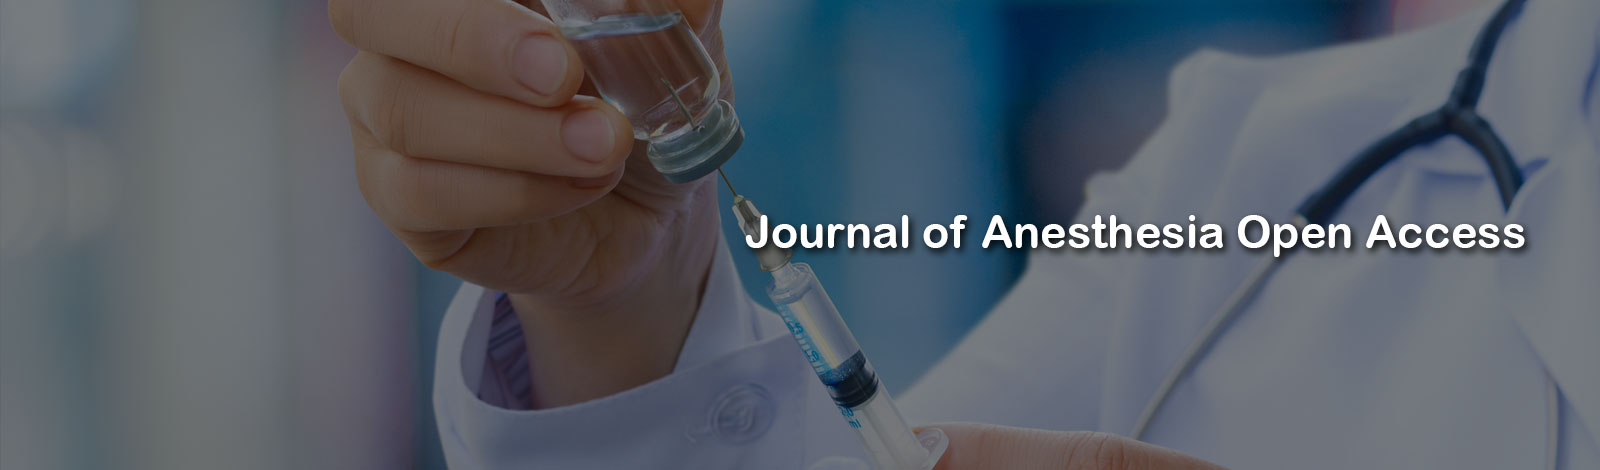 Journal of Anesthesia Open Access